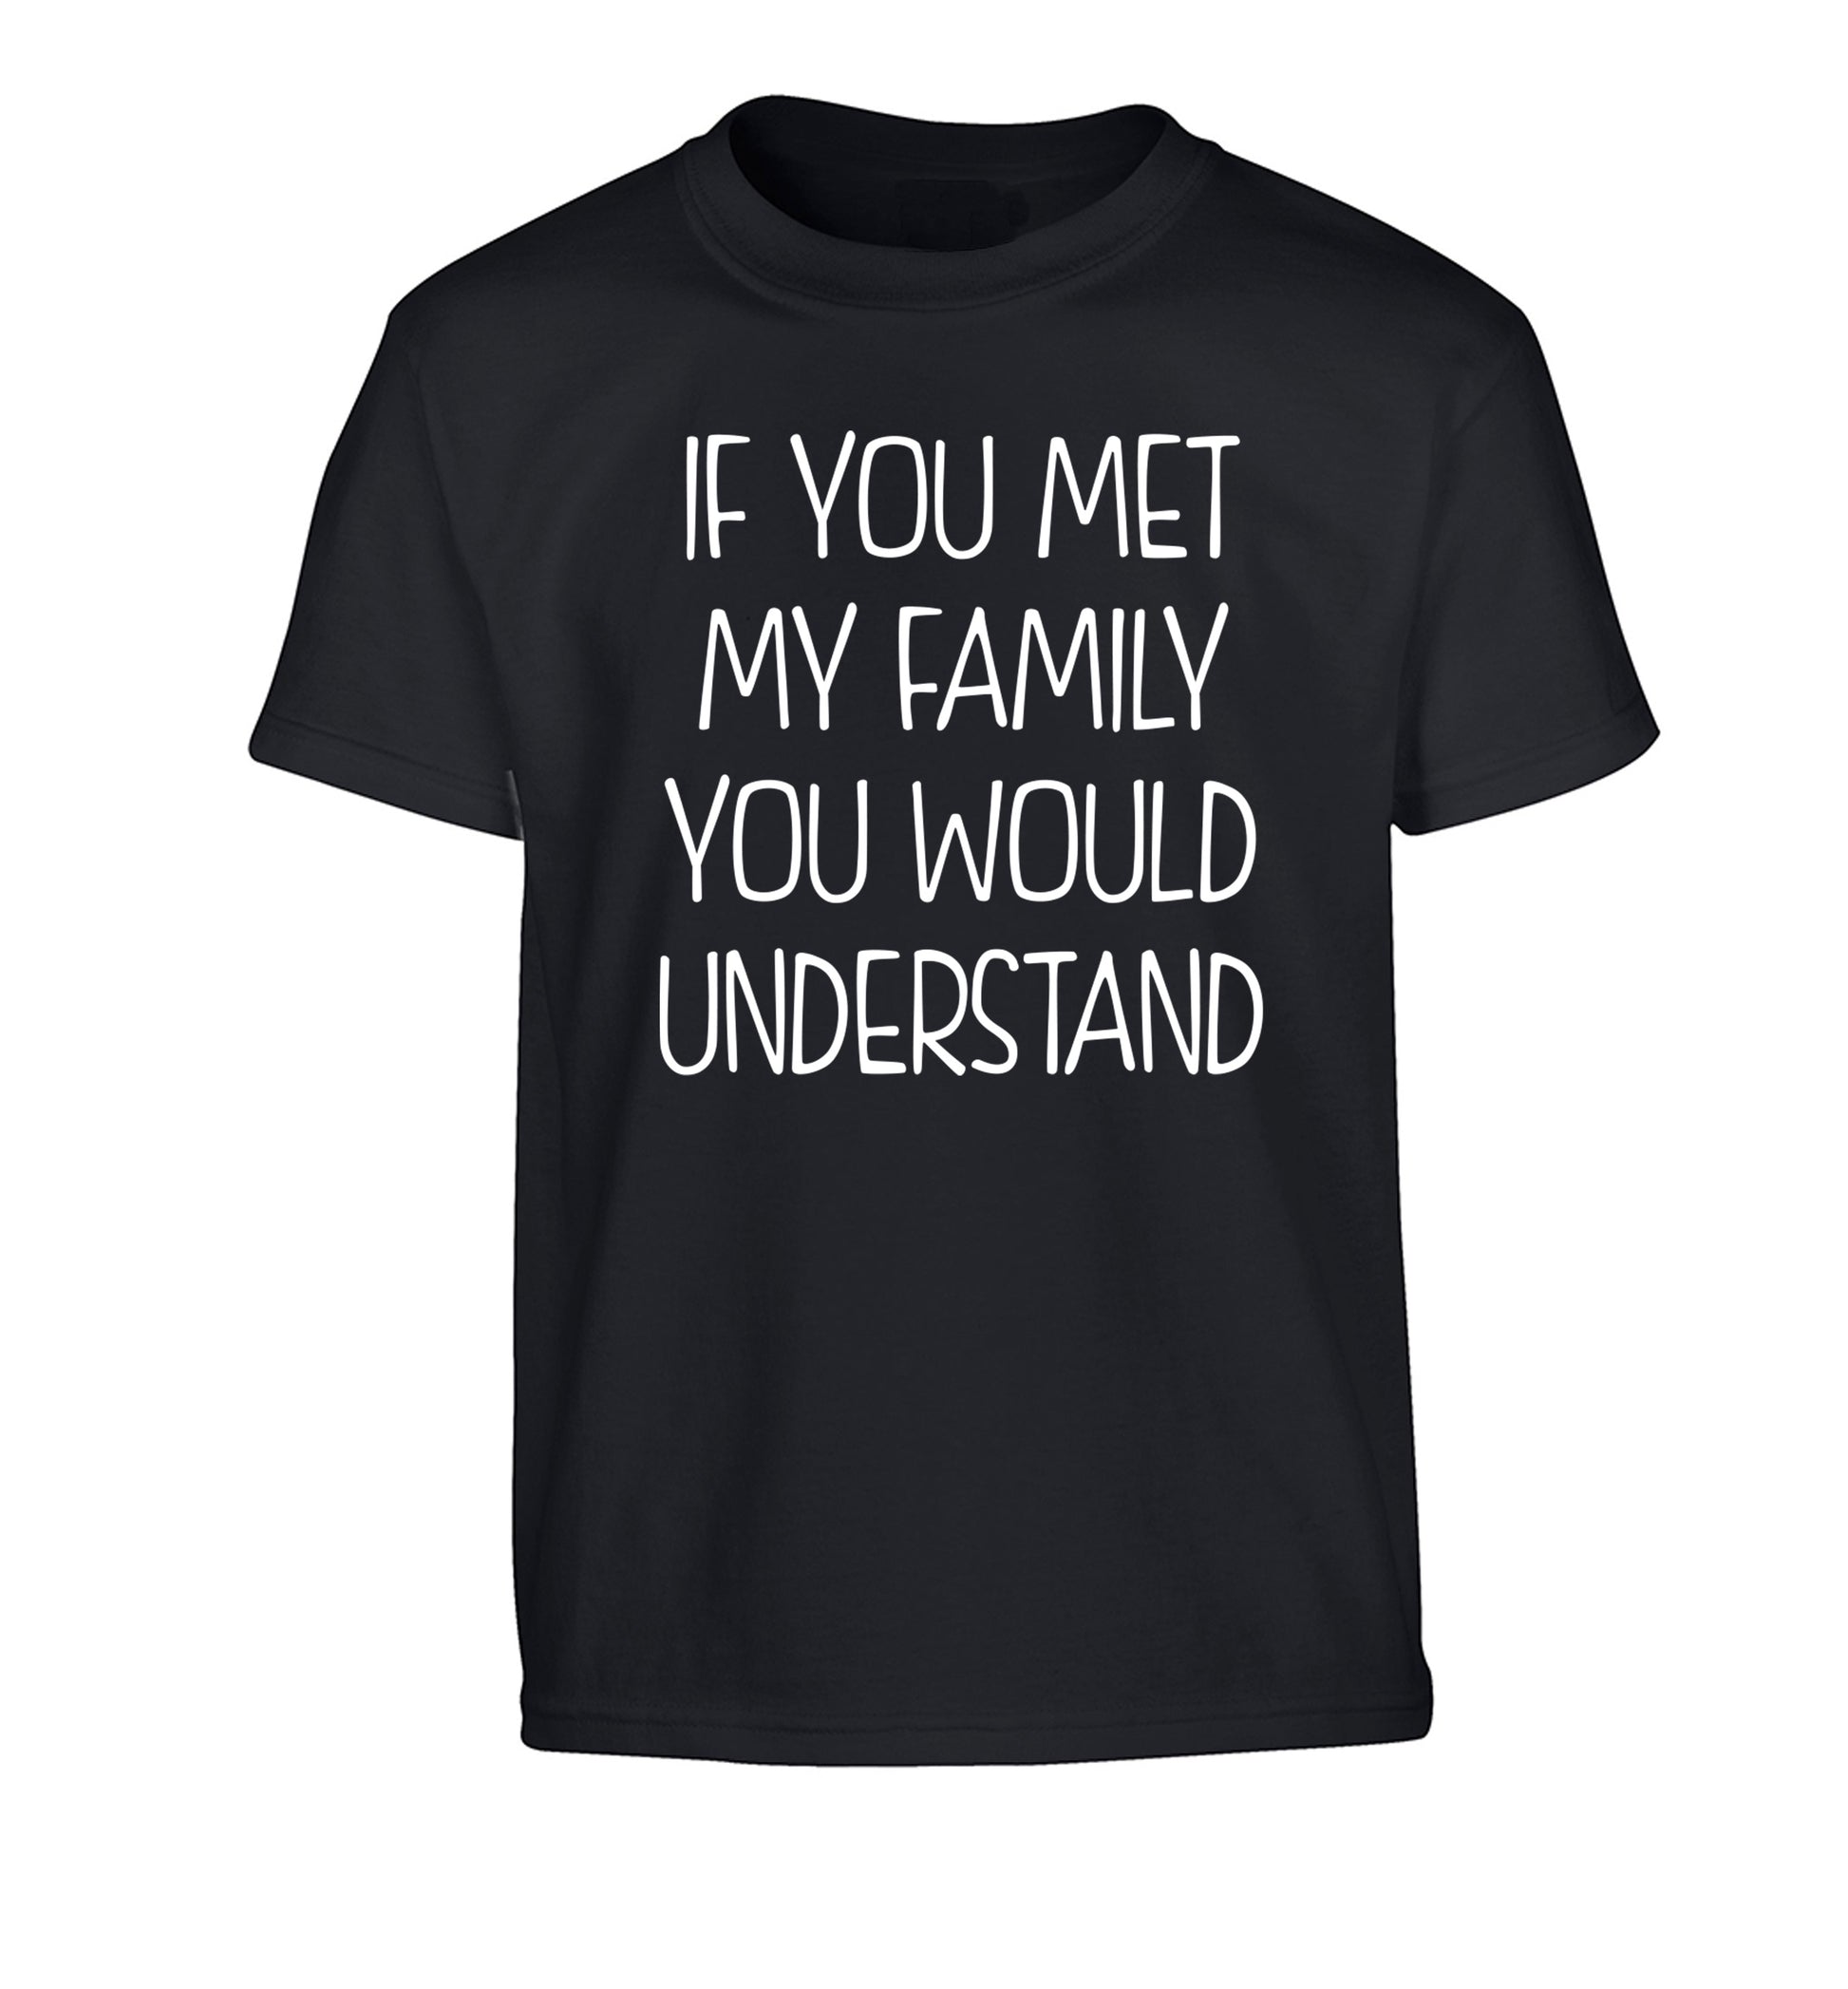 If you met my family you would understand Children's black Tshirt 12-13 Years